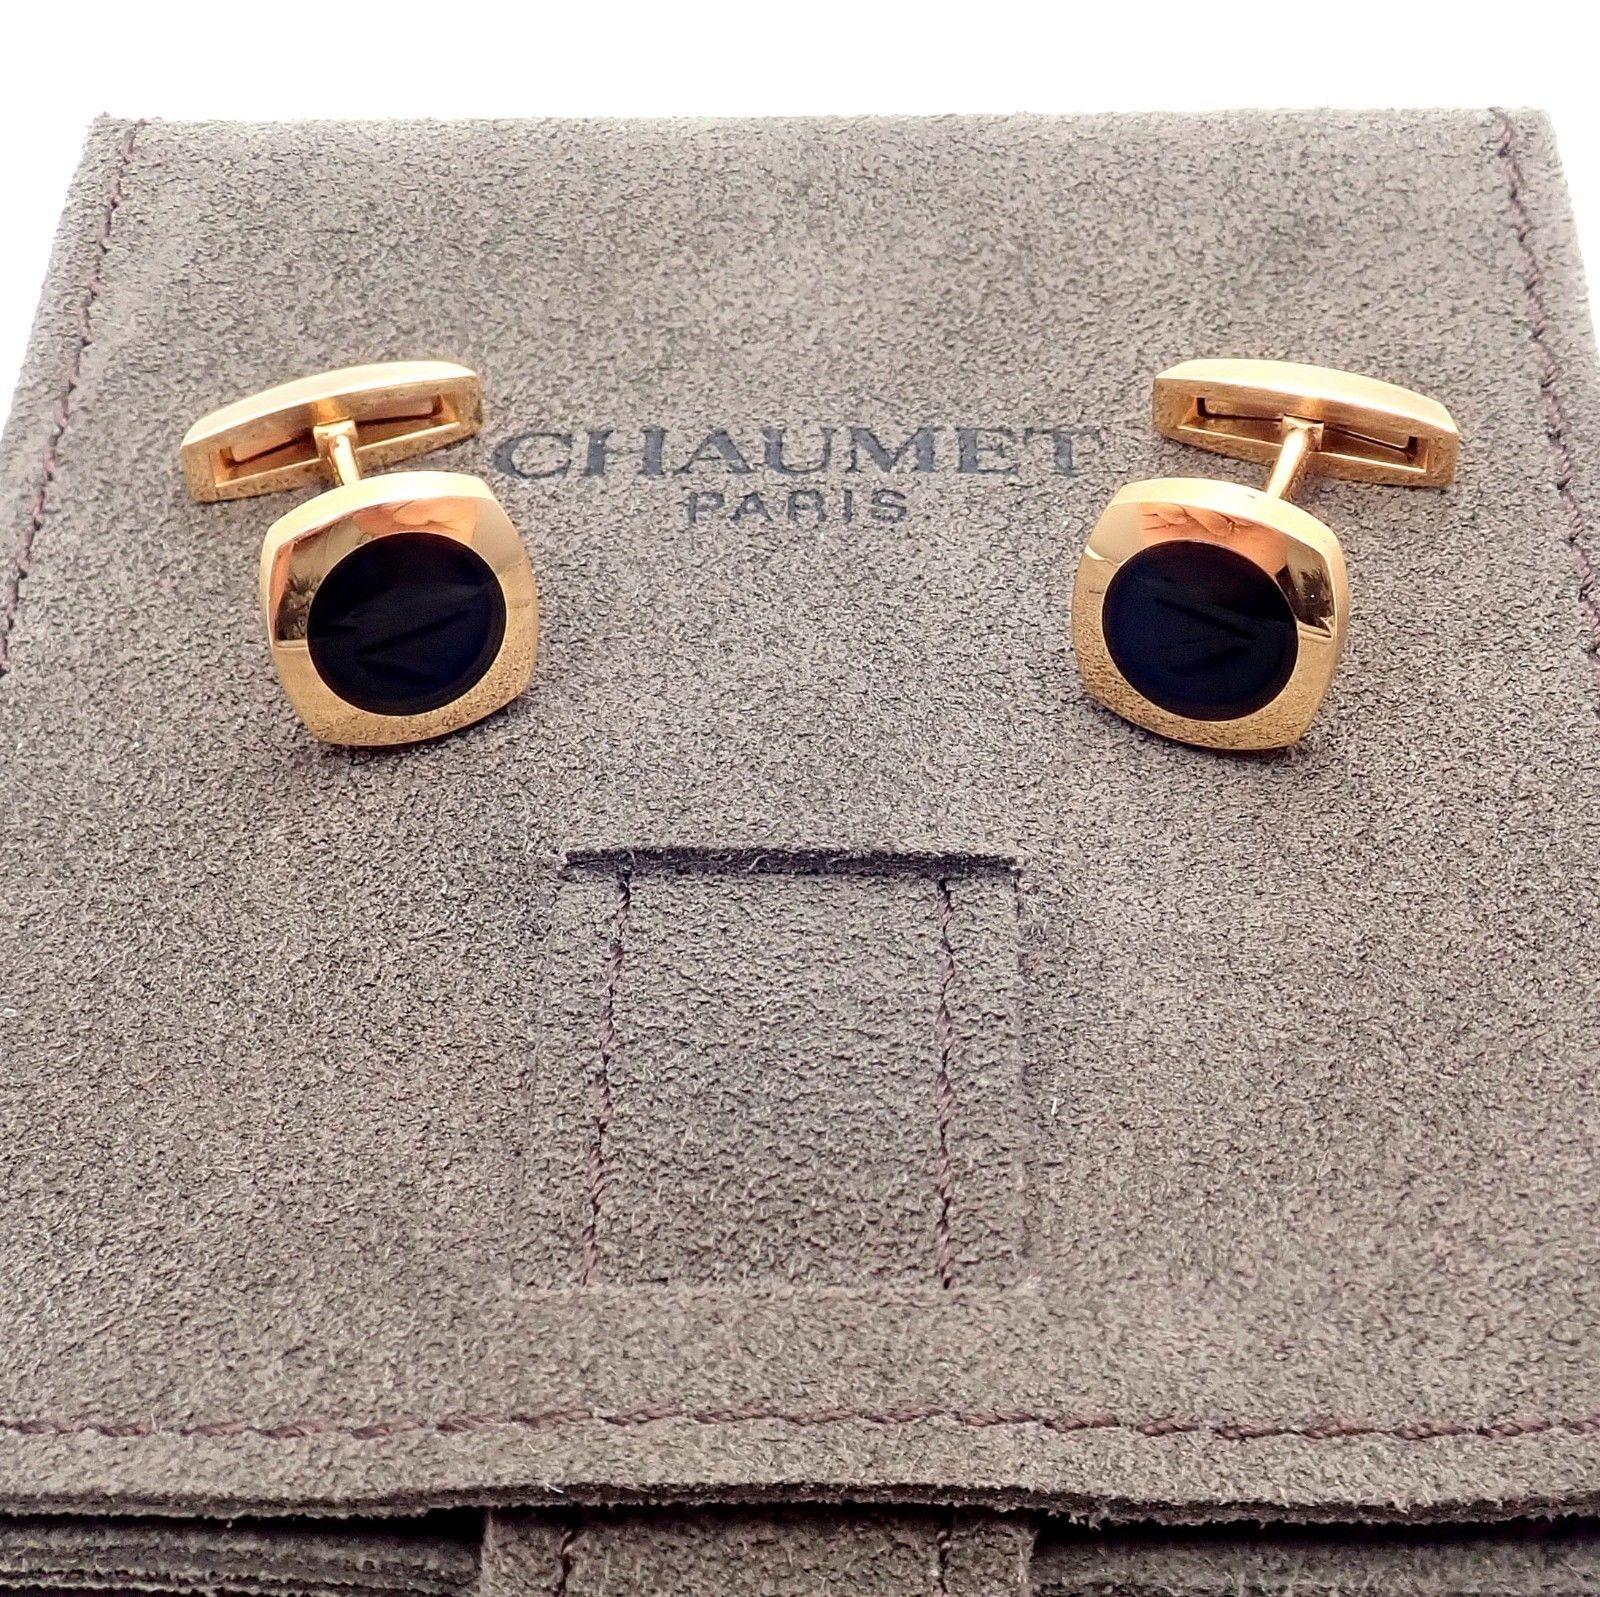 18k Rose Gold And Black Onyx Cufflinks by Chaumet.
With 2 round black onyx stones 9mm each
Details: 
Cufflinks: 12mm x 12mm x 20mm
Weight:	11 grams
Stamped Hallmarks: Chaumet 750 668463
Chaumet Pouch Included
*Free Shipping within the United